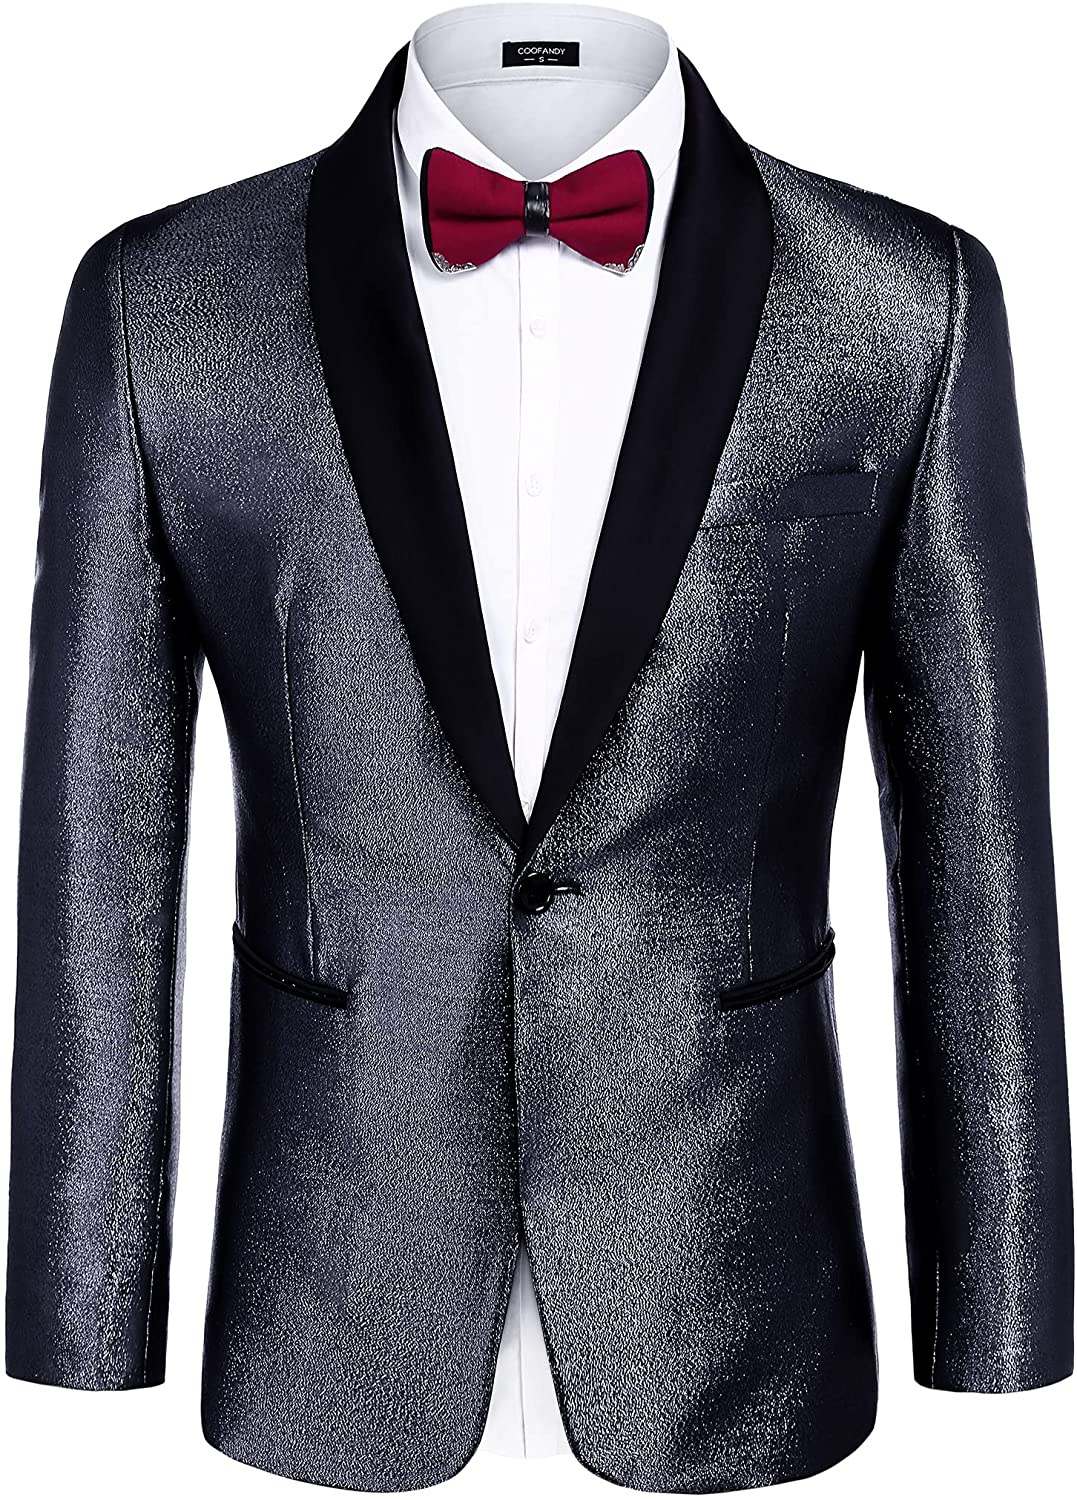 COOFANDY Mens Sequin Blazer Suit Jacket Christmas Slim Fit One Button Fashion Tuxedo Jacket for Dinner Party Wedding Prom 